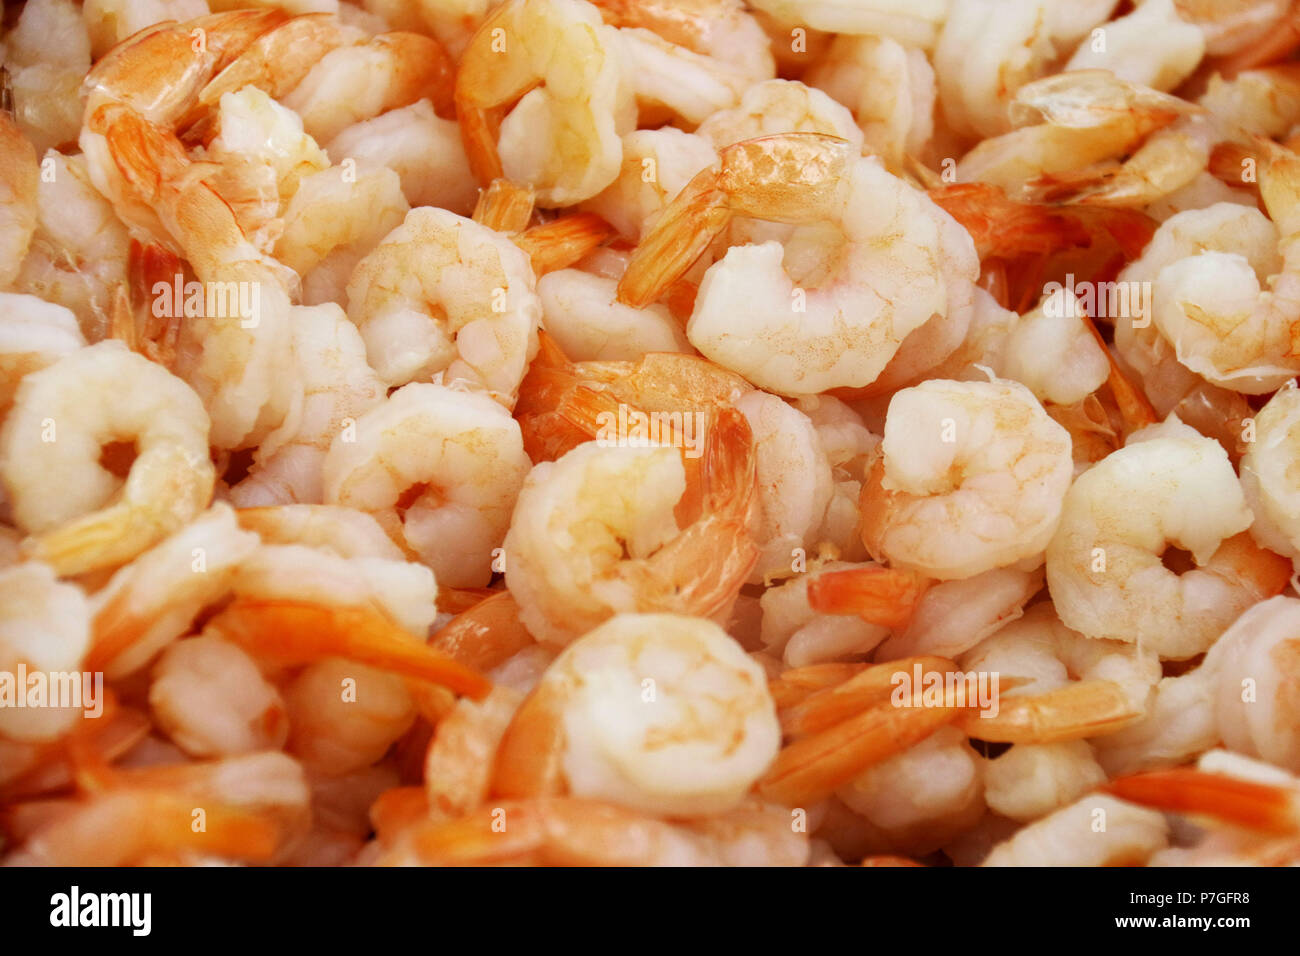 Cooked farmed shrimp on ice Stock Photo